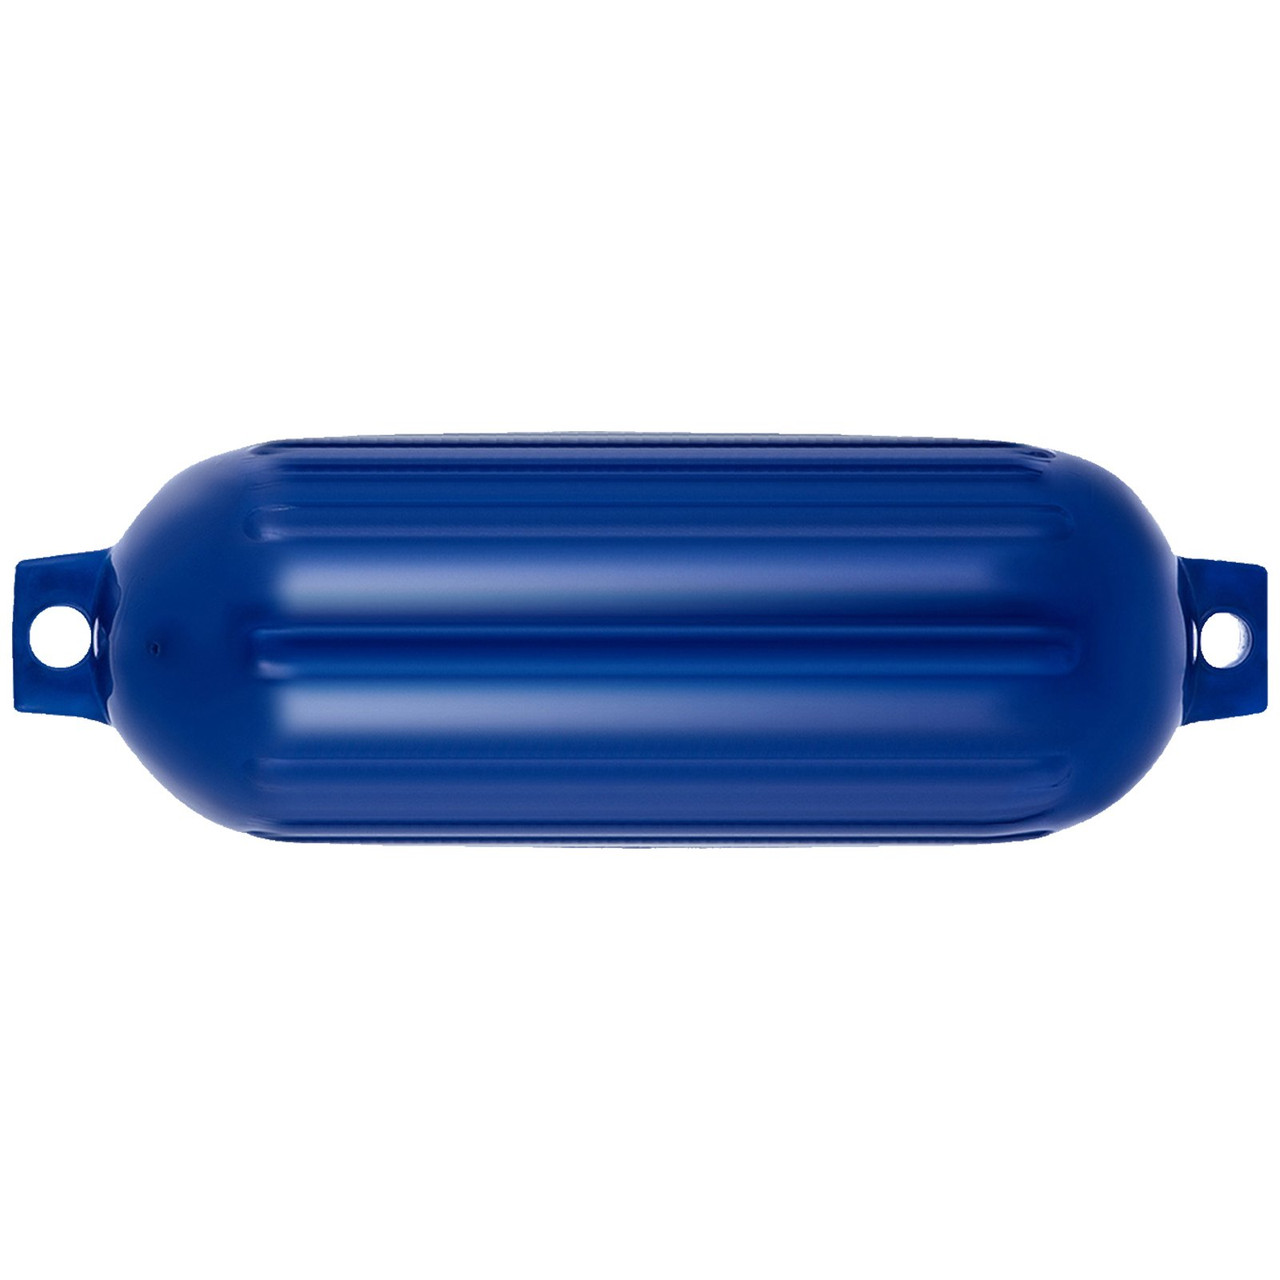 VEVOR Ribbed Twin Eyes Boat Fender Pack of 4 and Pump to Inflate (Blue,8.5 x 27 inches)